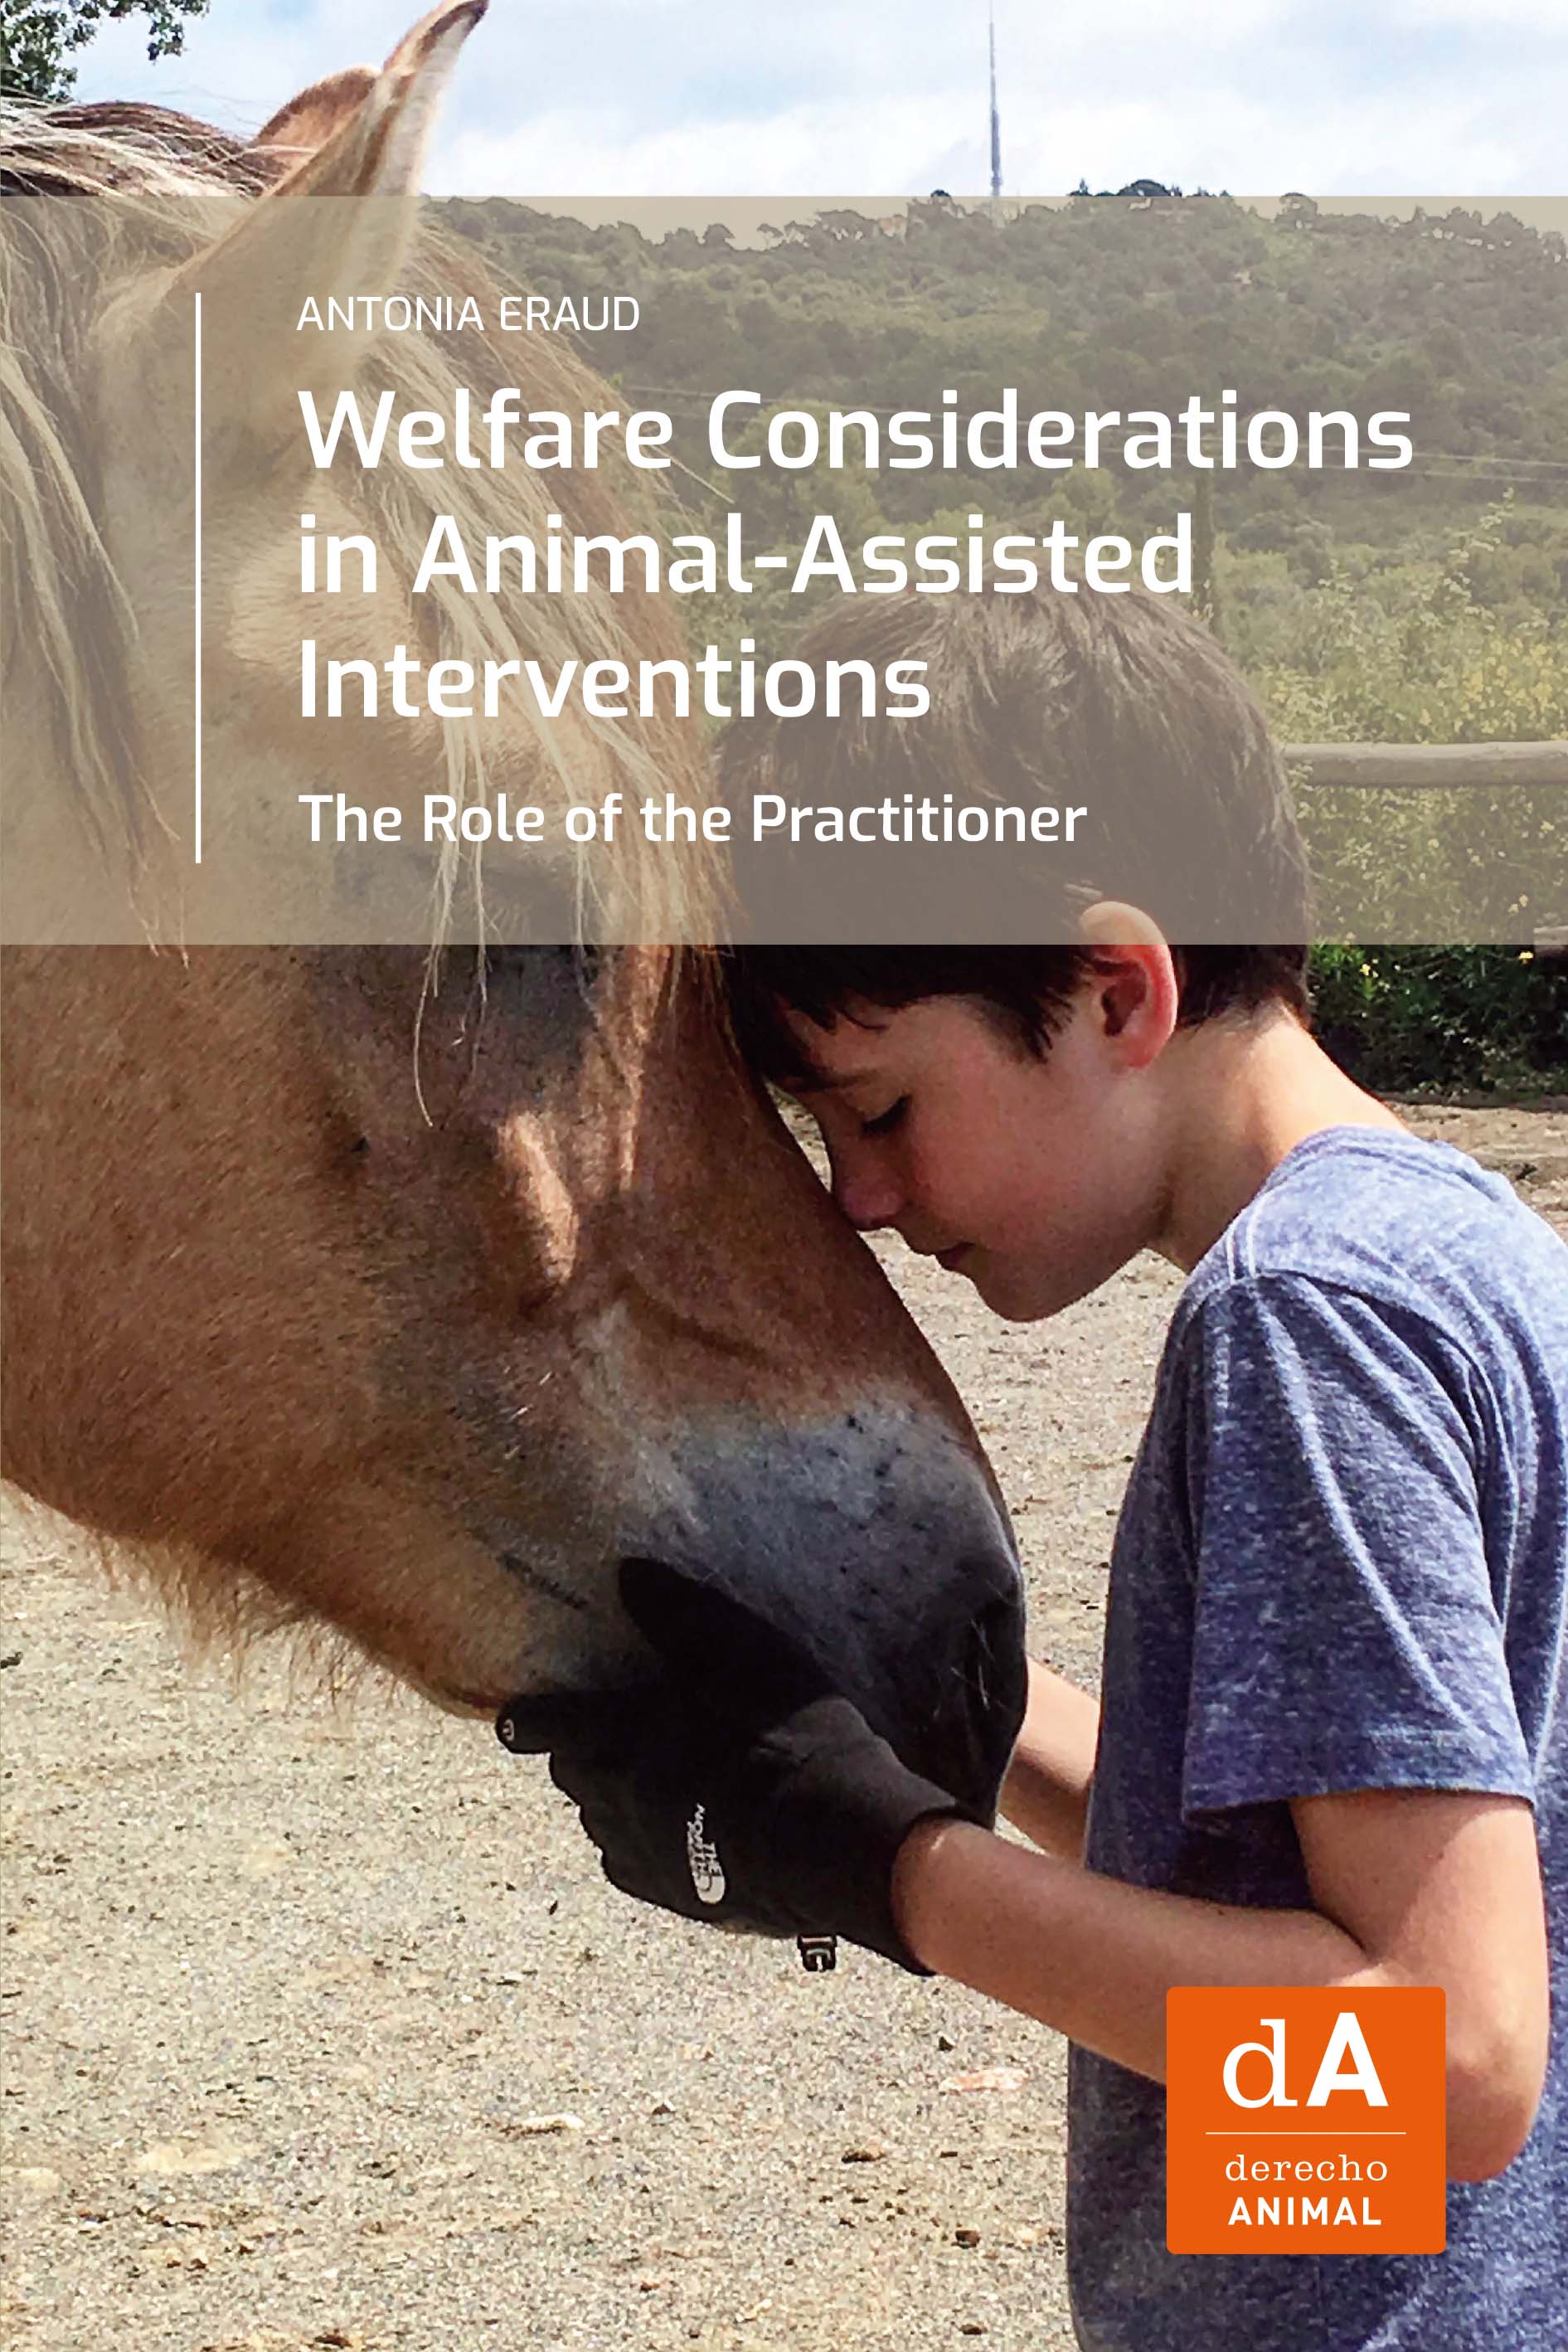 Welfare Considerations in Animal-Assisted Interventions